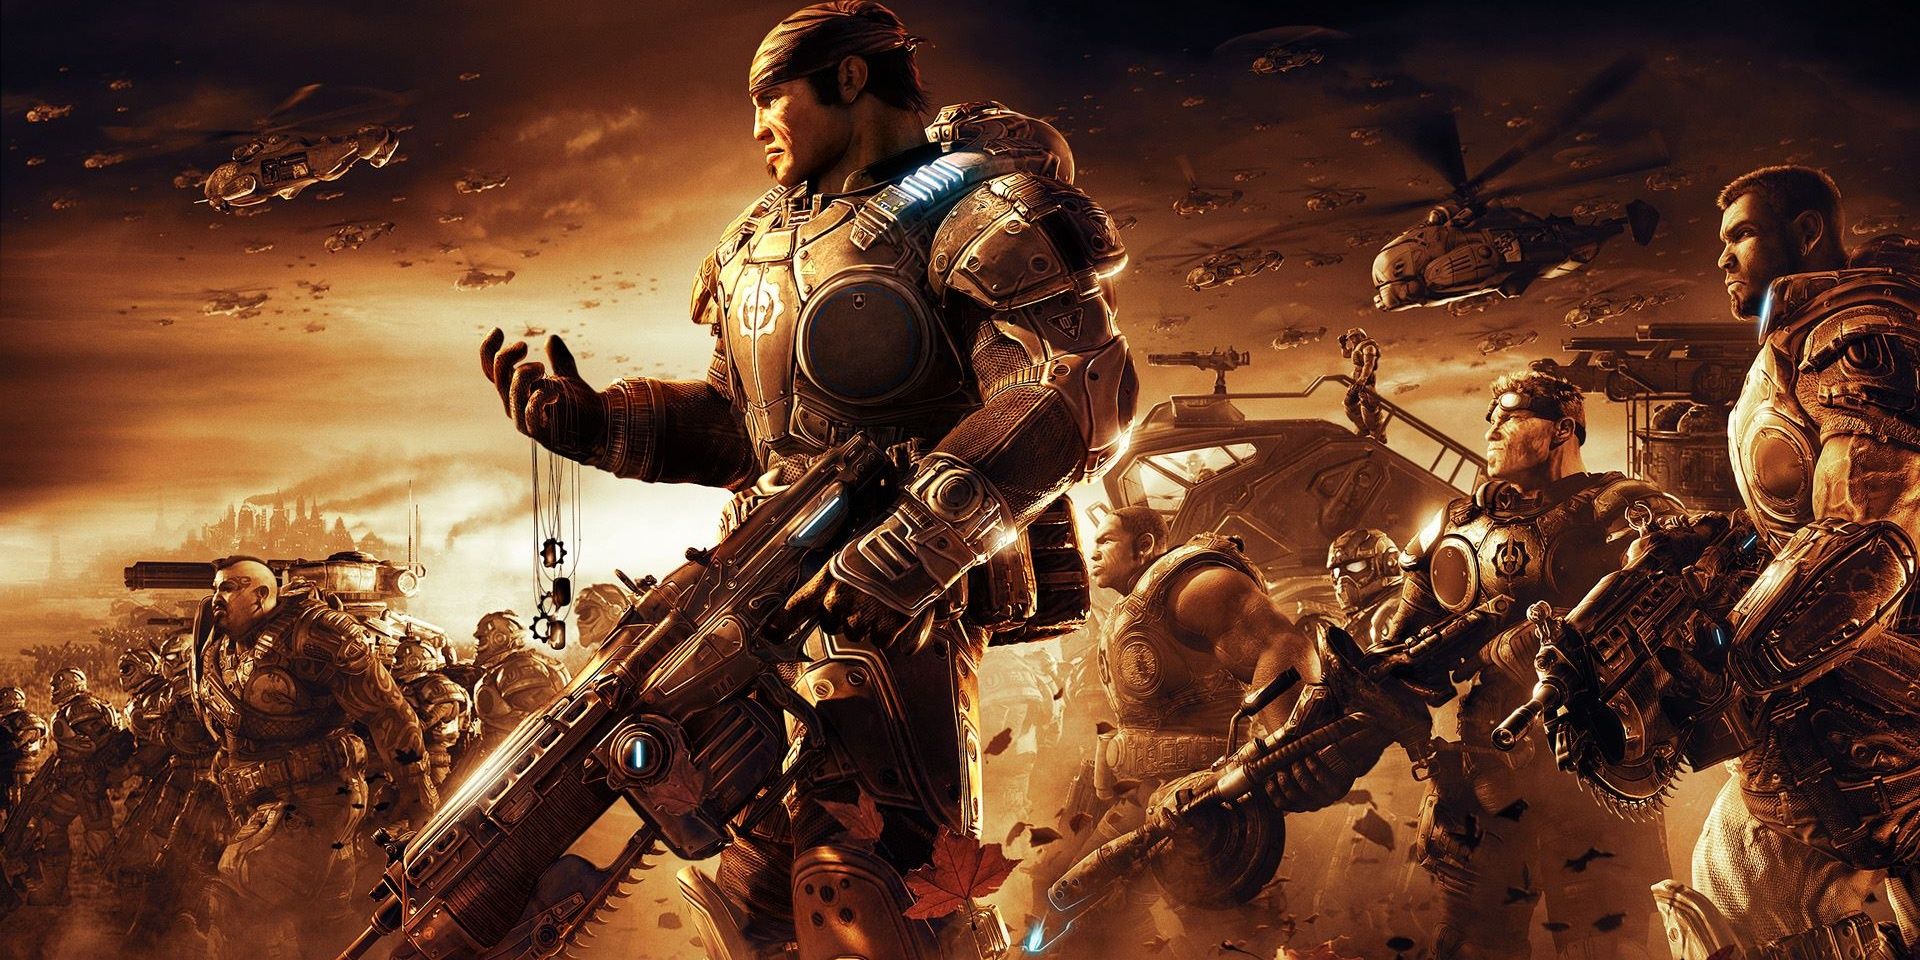 Gears Of War 2 Delta Squad cover